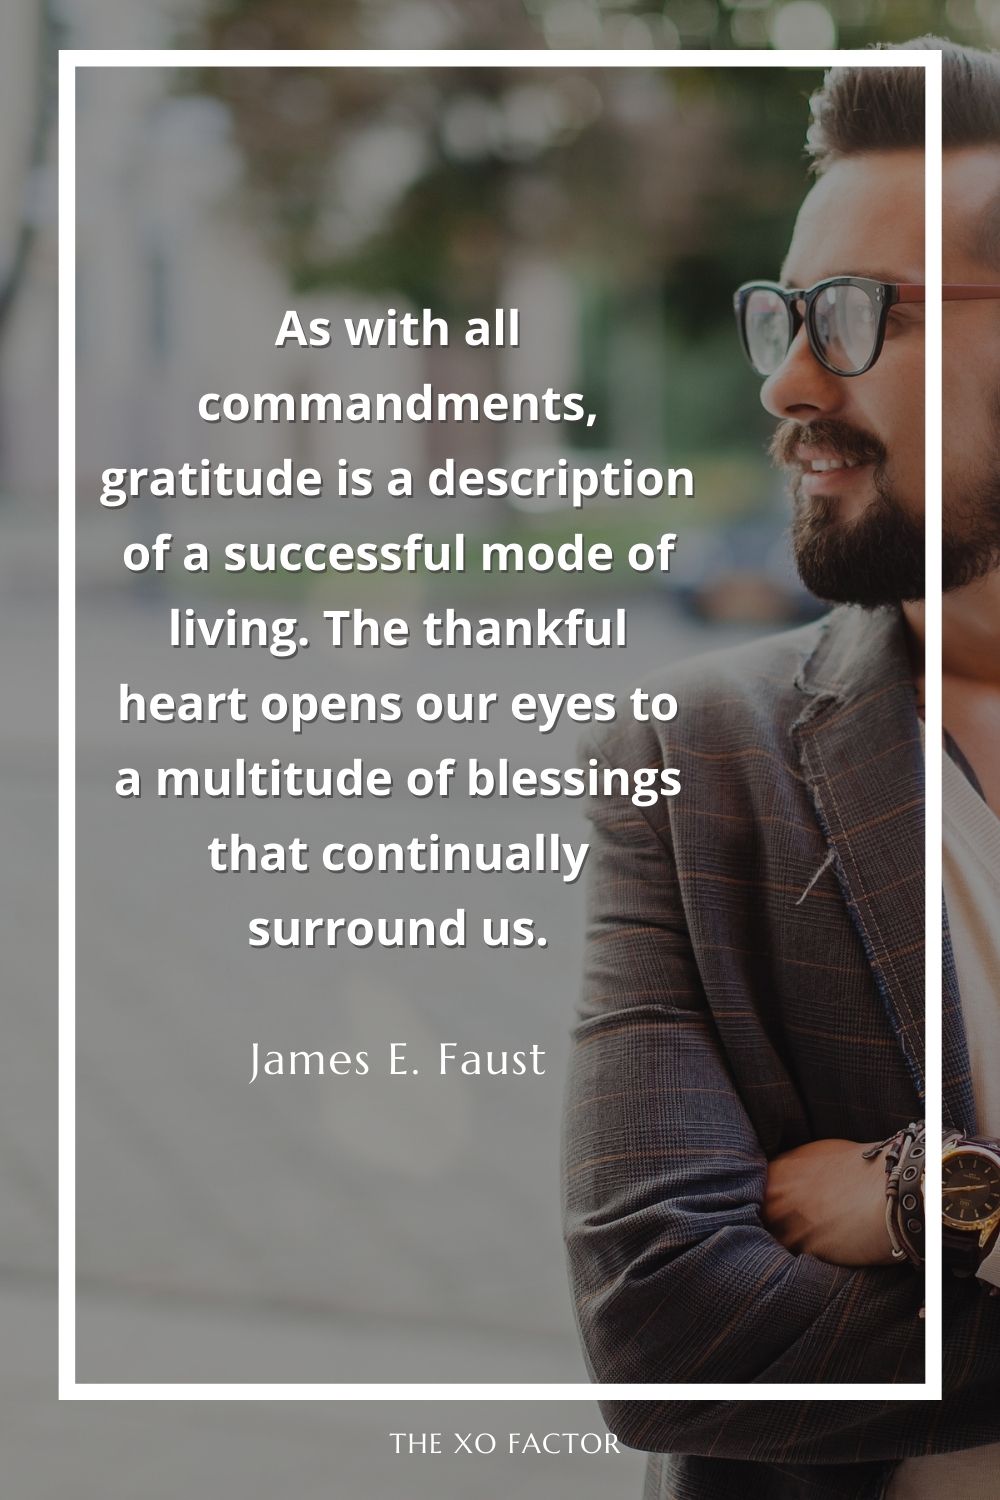 As with all commandments, gratitude is a description of a successful mode of living. The thankful heart opens our eyes to a multitude of blessings that continually surround us.